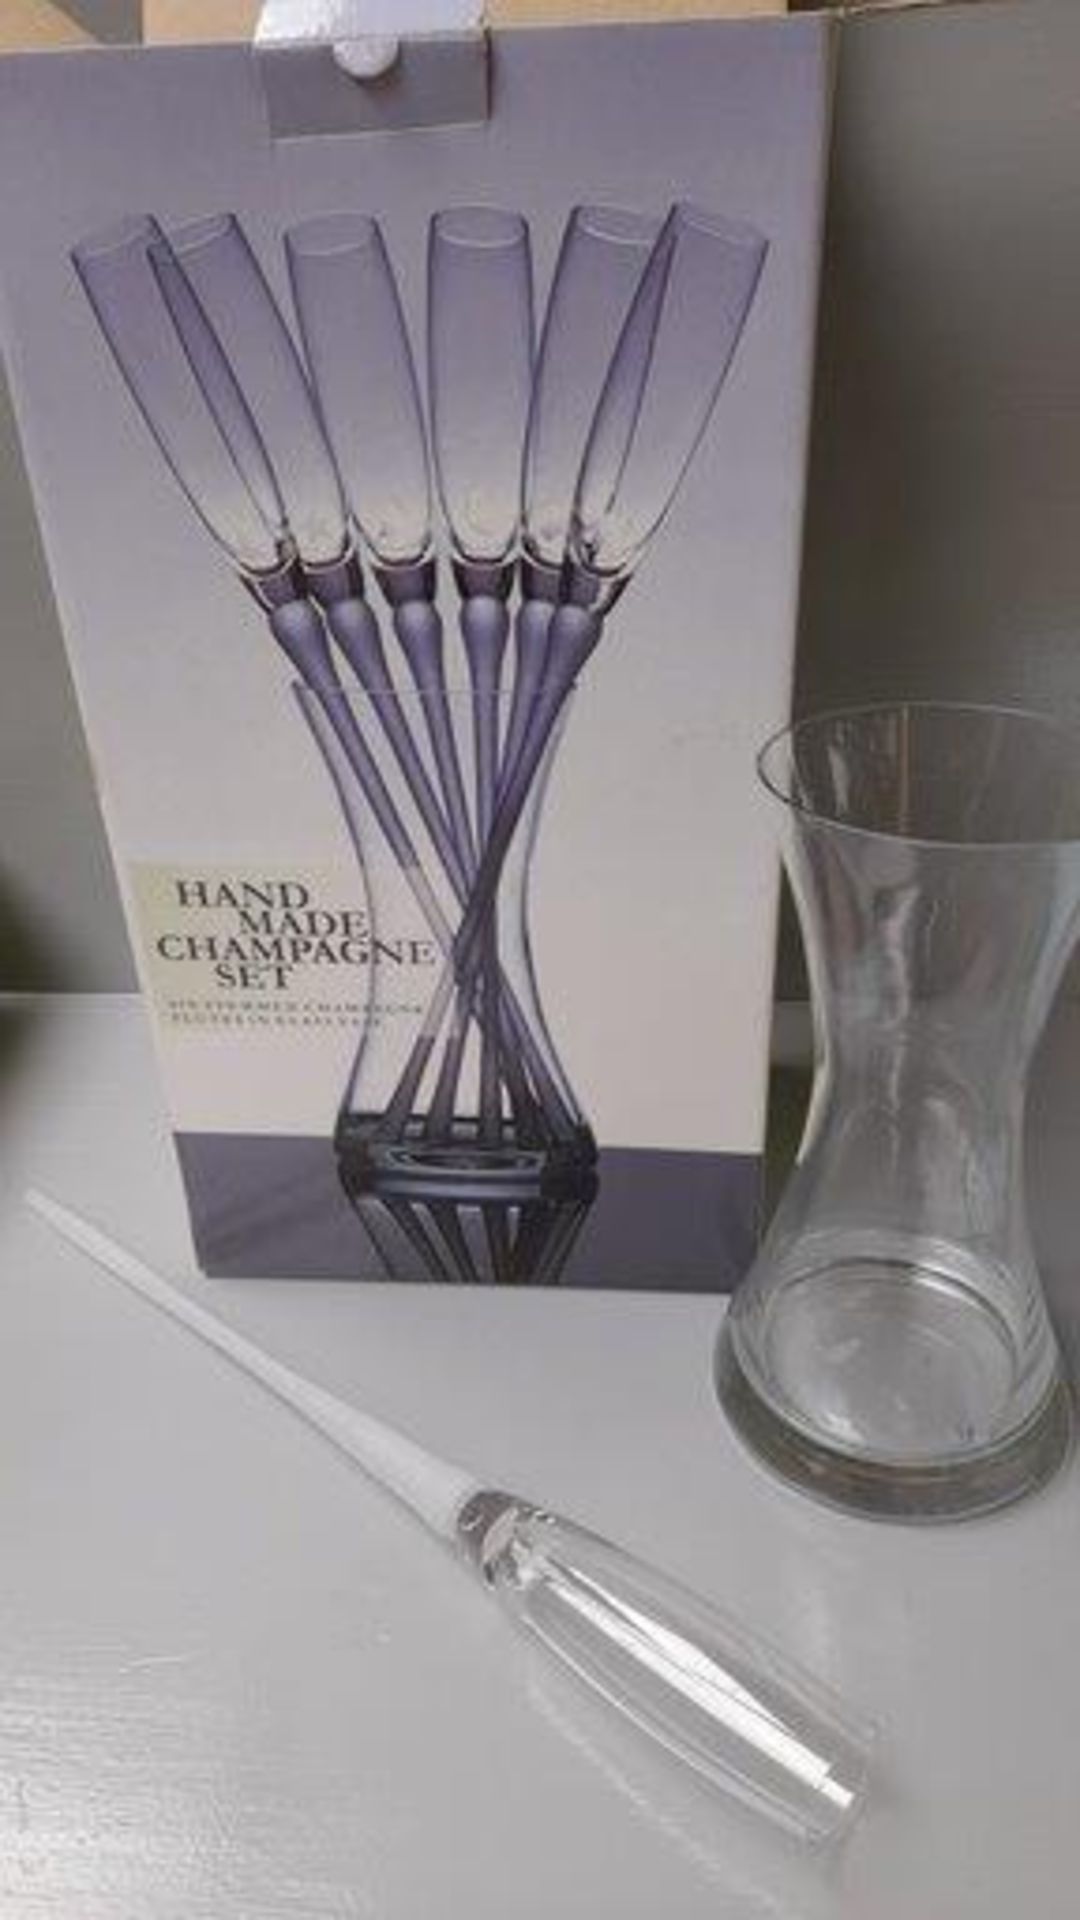 Hand Made Champagne Set In Box Including 6 Stemmed Champagne Flutes In Glass Vase - Image 2 of 2